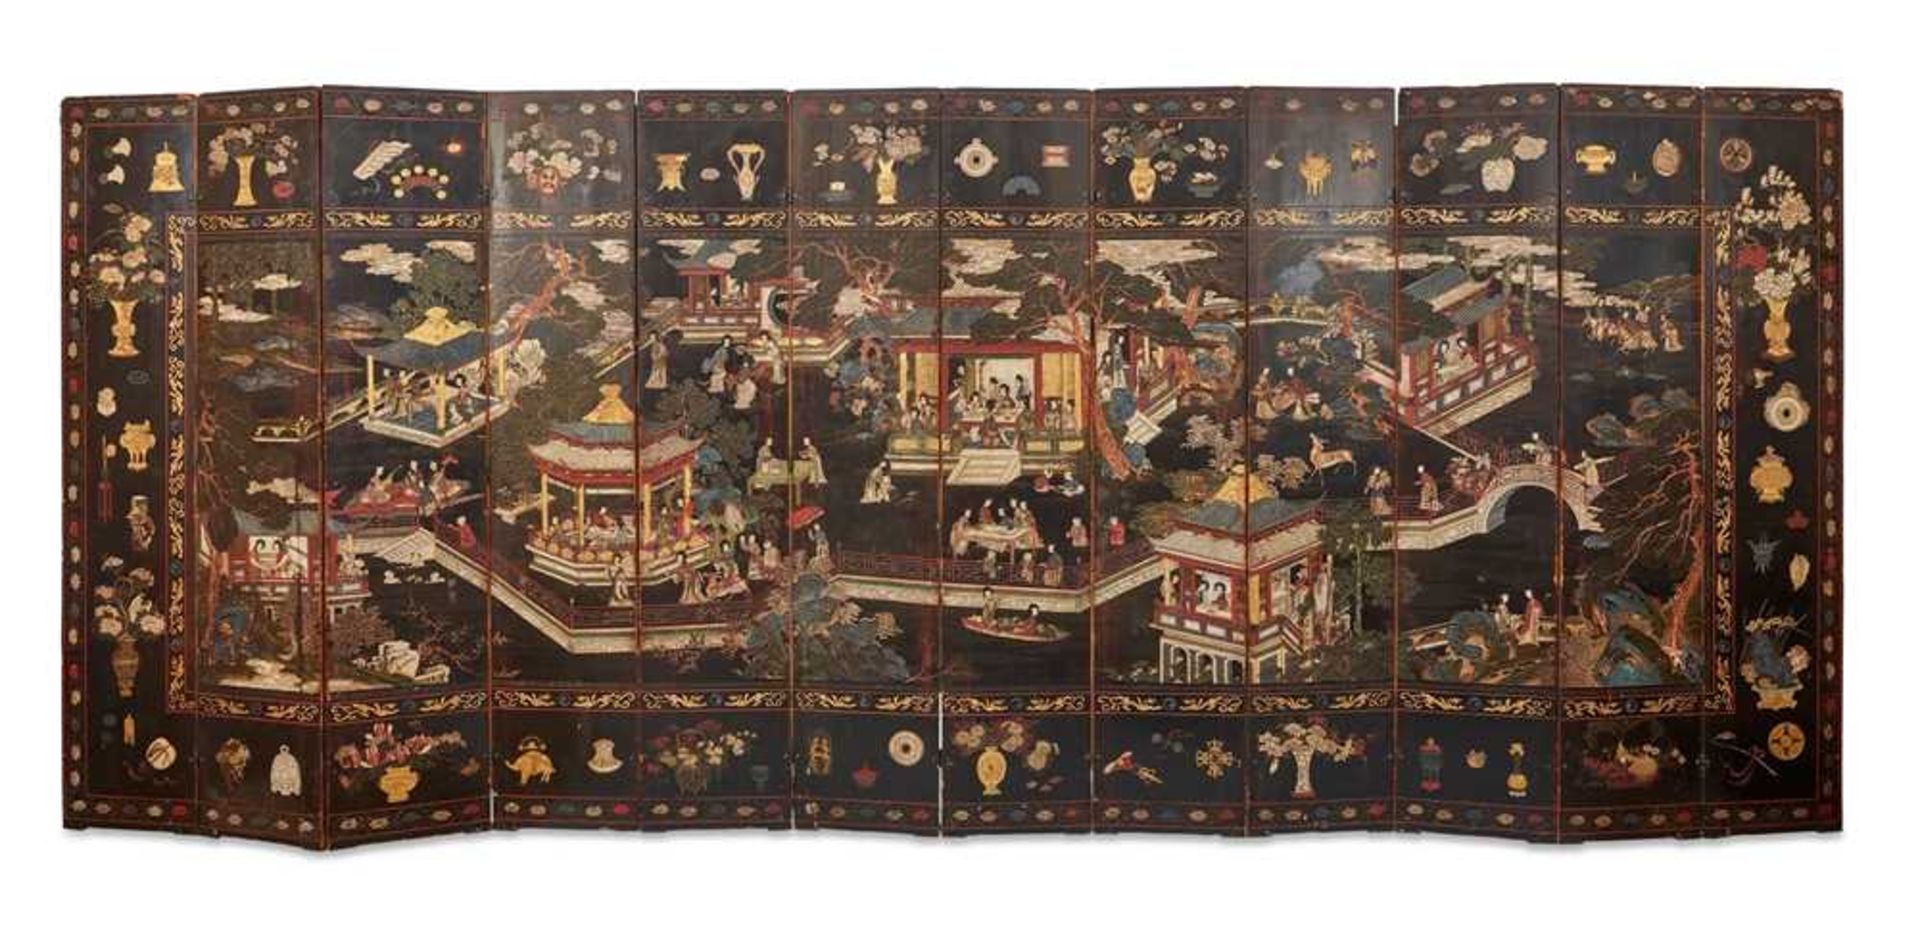 A CHINESE COROMANDEL BLACK LACQUER TWELVE-PANEL SCREEN QING DYNASTY, 18TH CENTURY